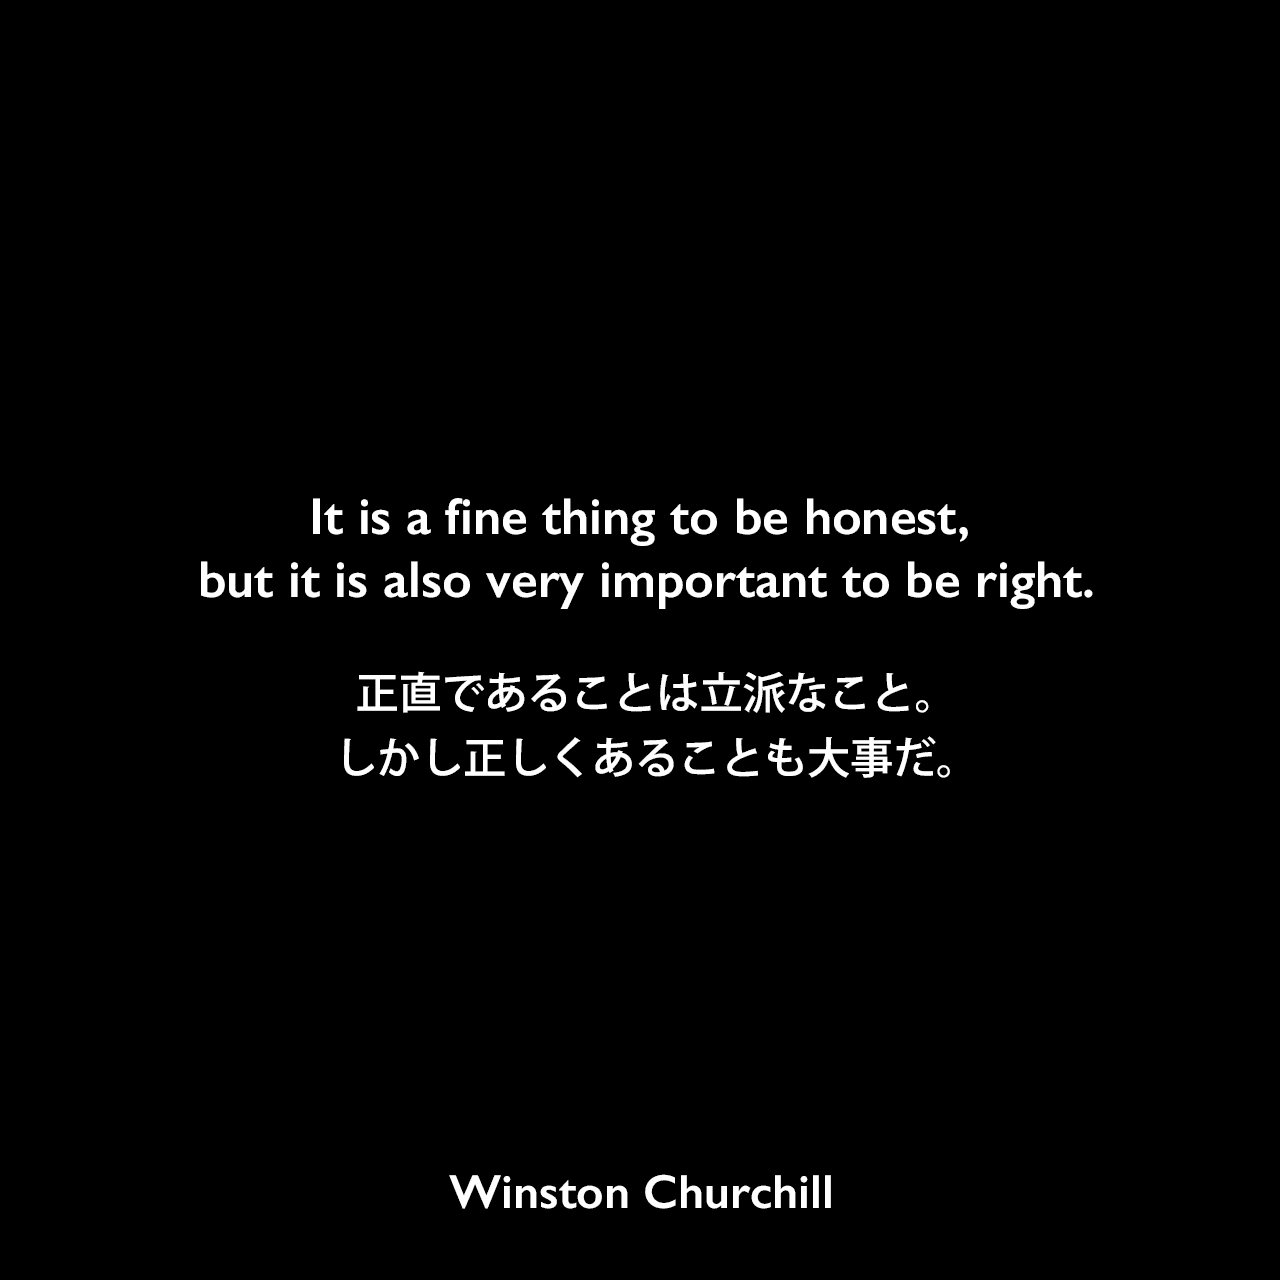 It is a fine thing to be honest, but it is also very important to be right.正直であることは立派なこと。しかし正しくあることも大事だ。Winston Churchill